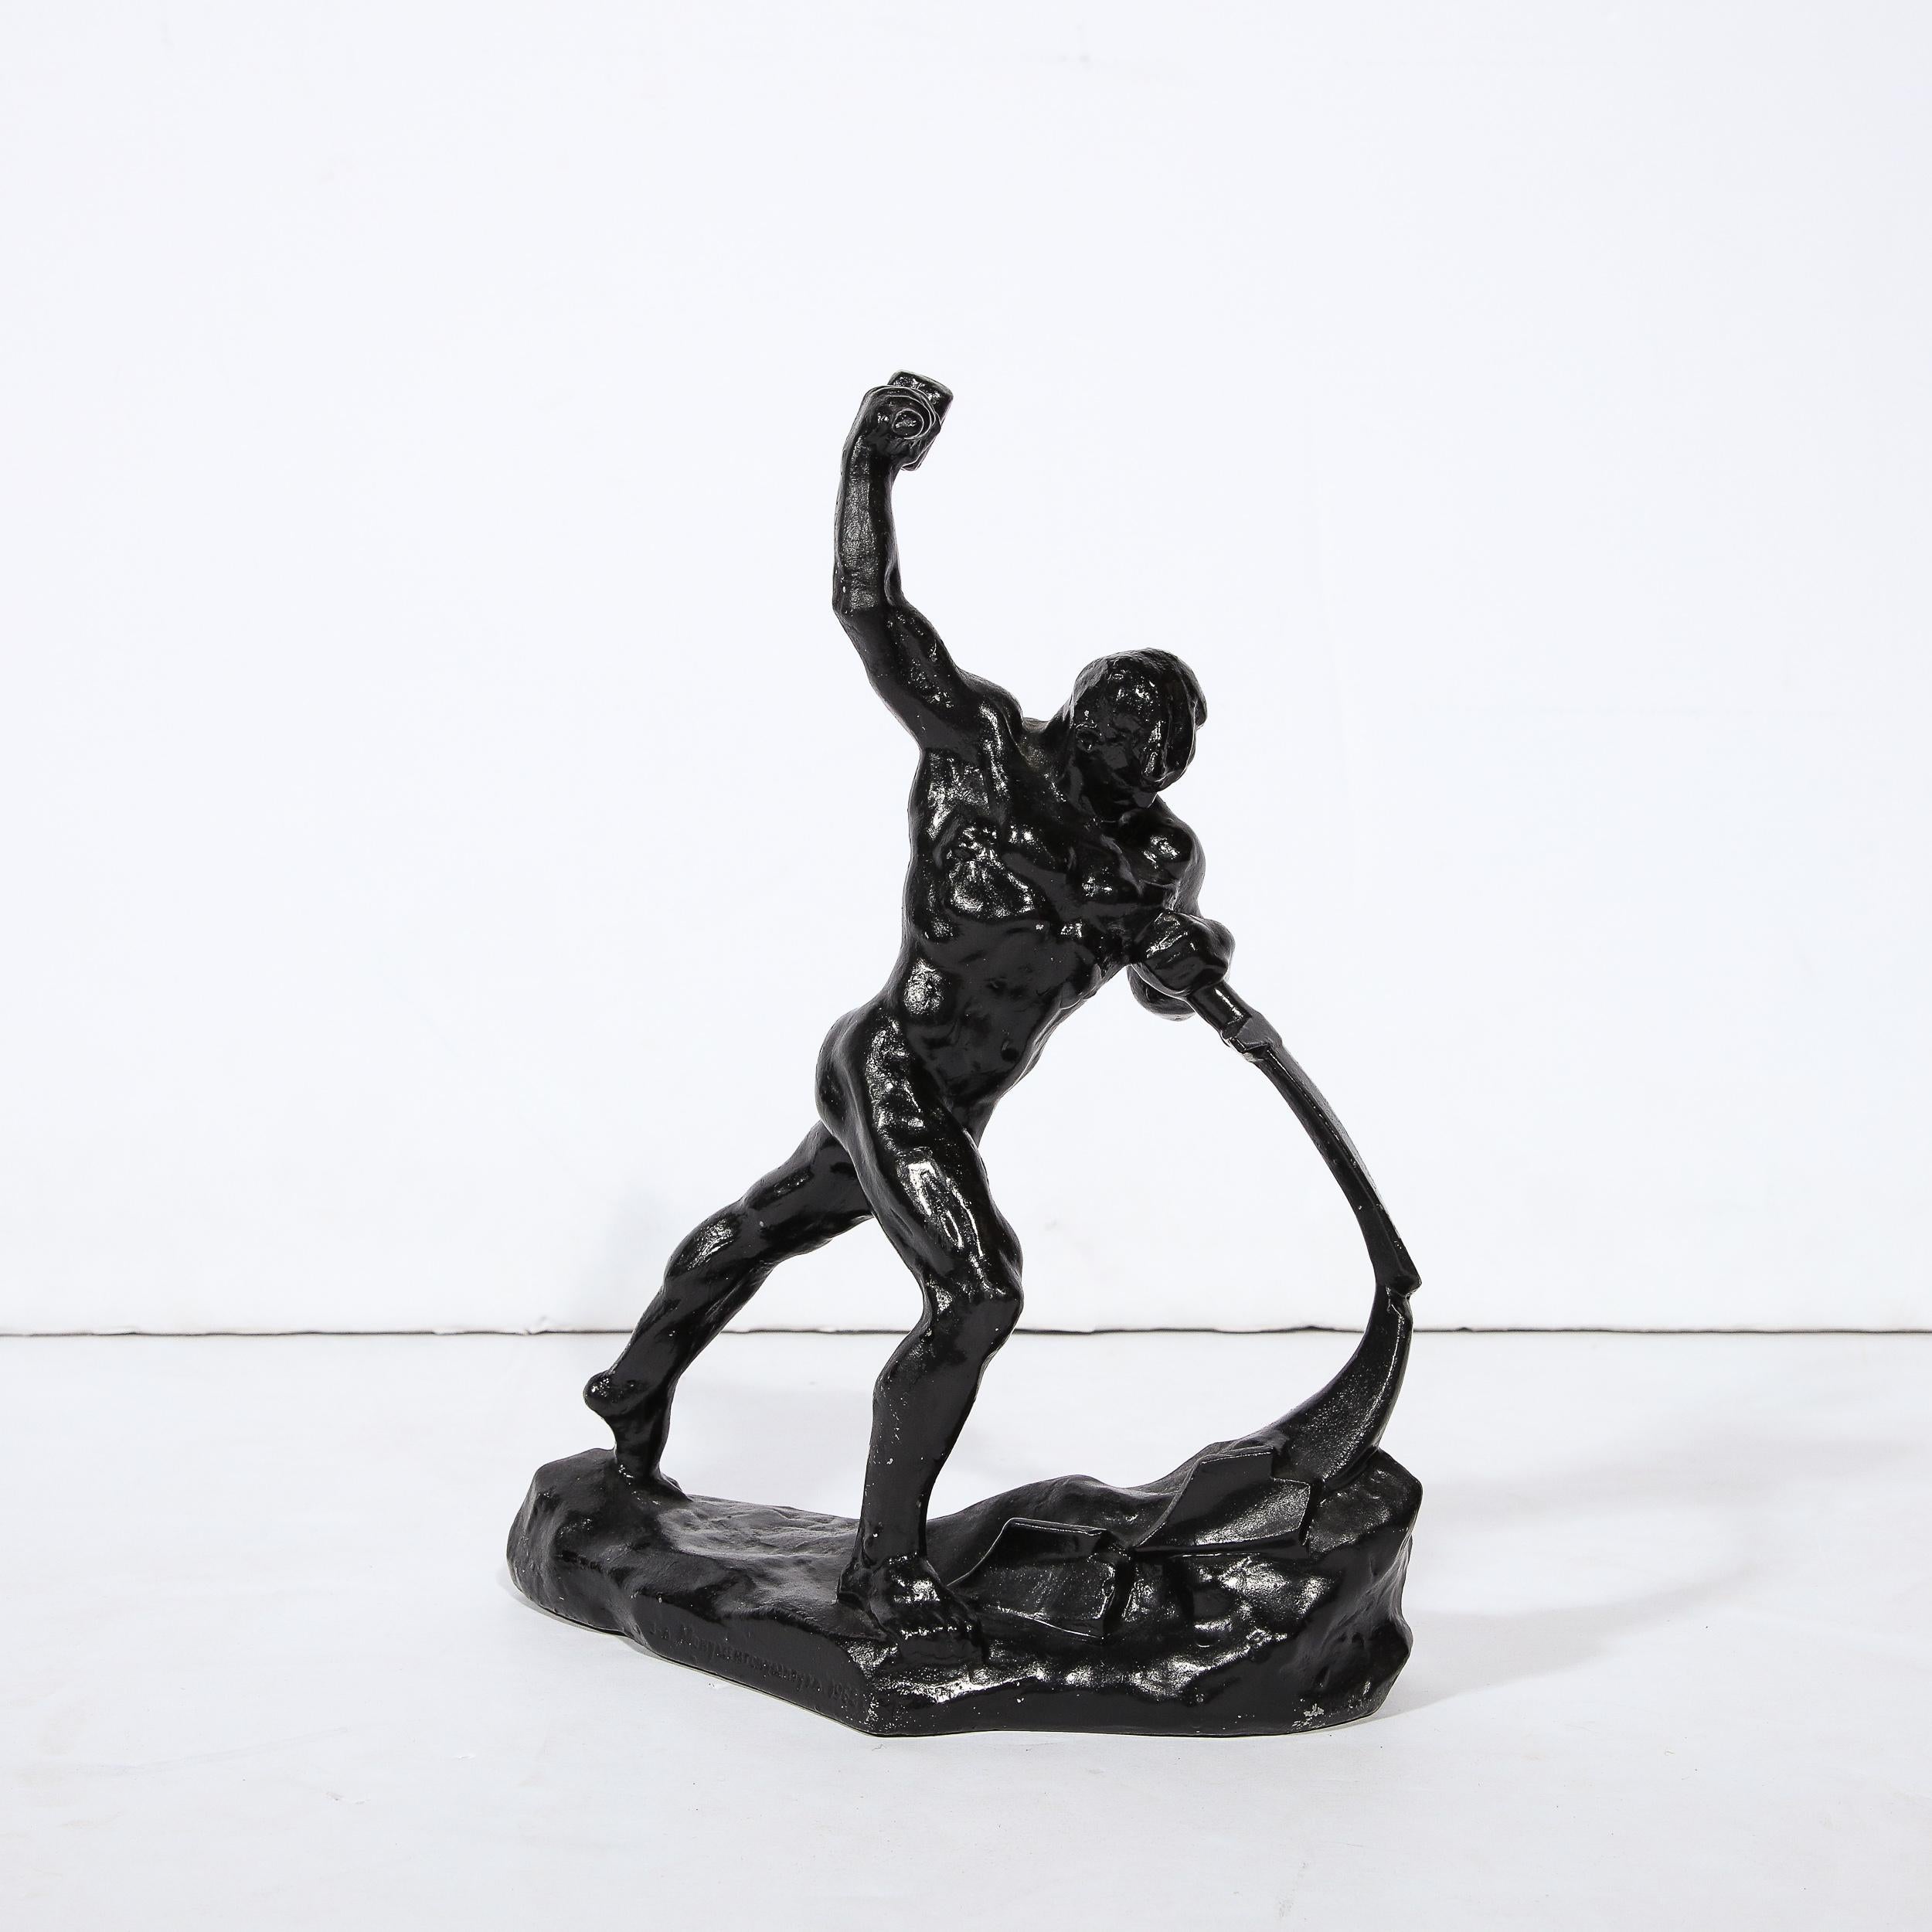 This handsome sculpture was realized in Russia in the 20th century. Created in blackened bronze, it features a male nude figure in the process of forging a sword. He is portrayed mid swing as he strikes the sword with a Hammer. His body torqued all